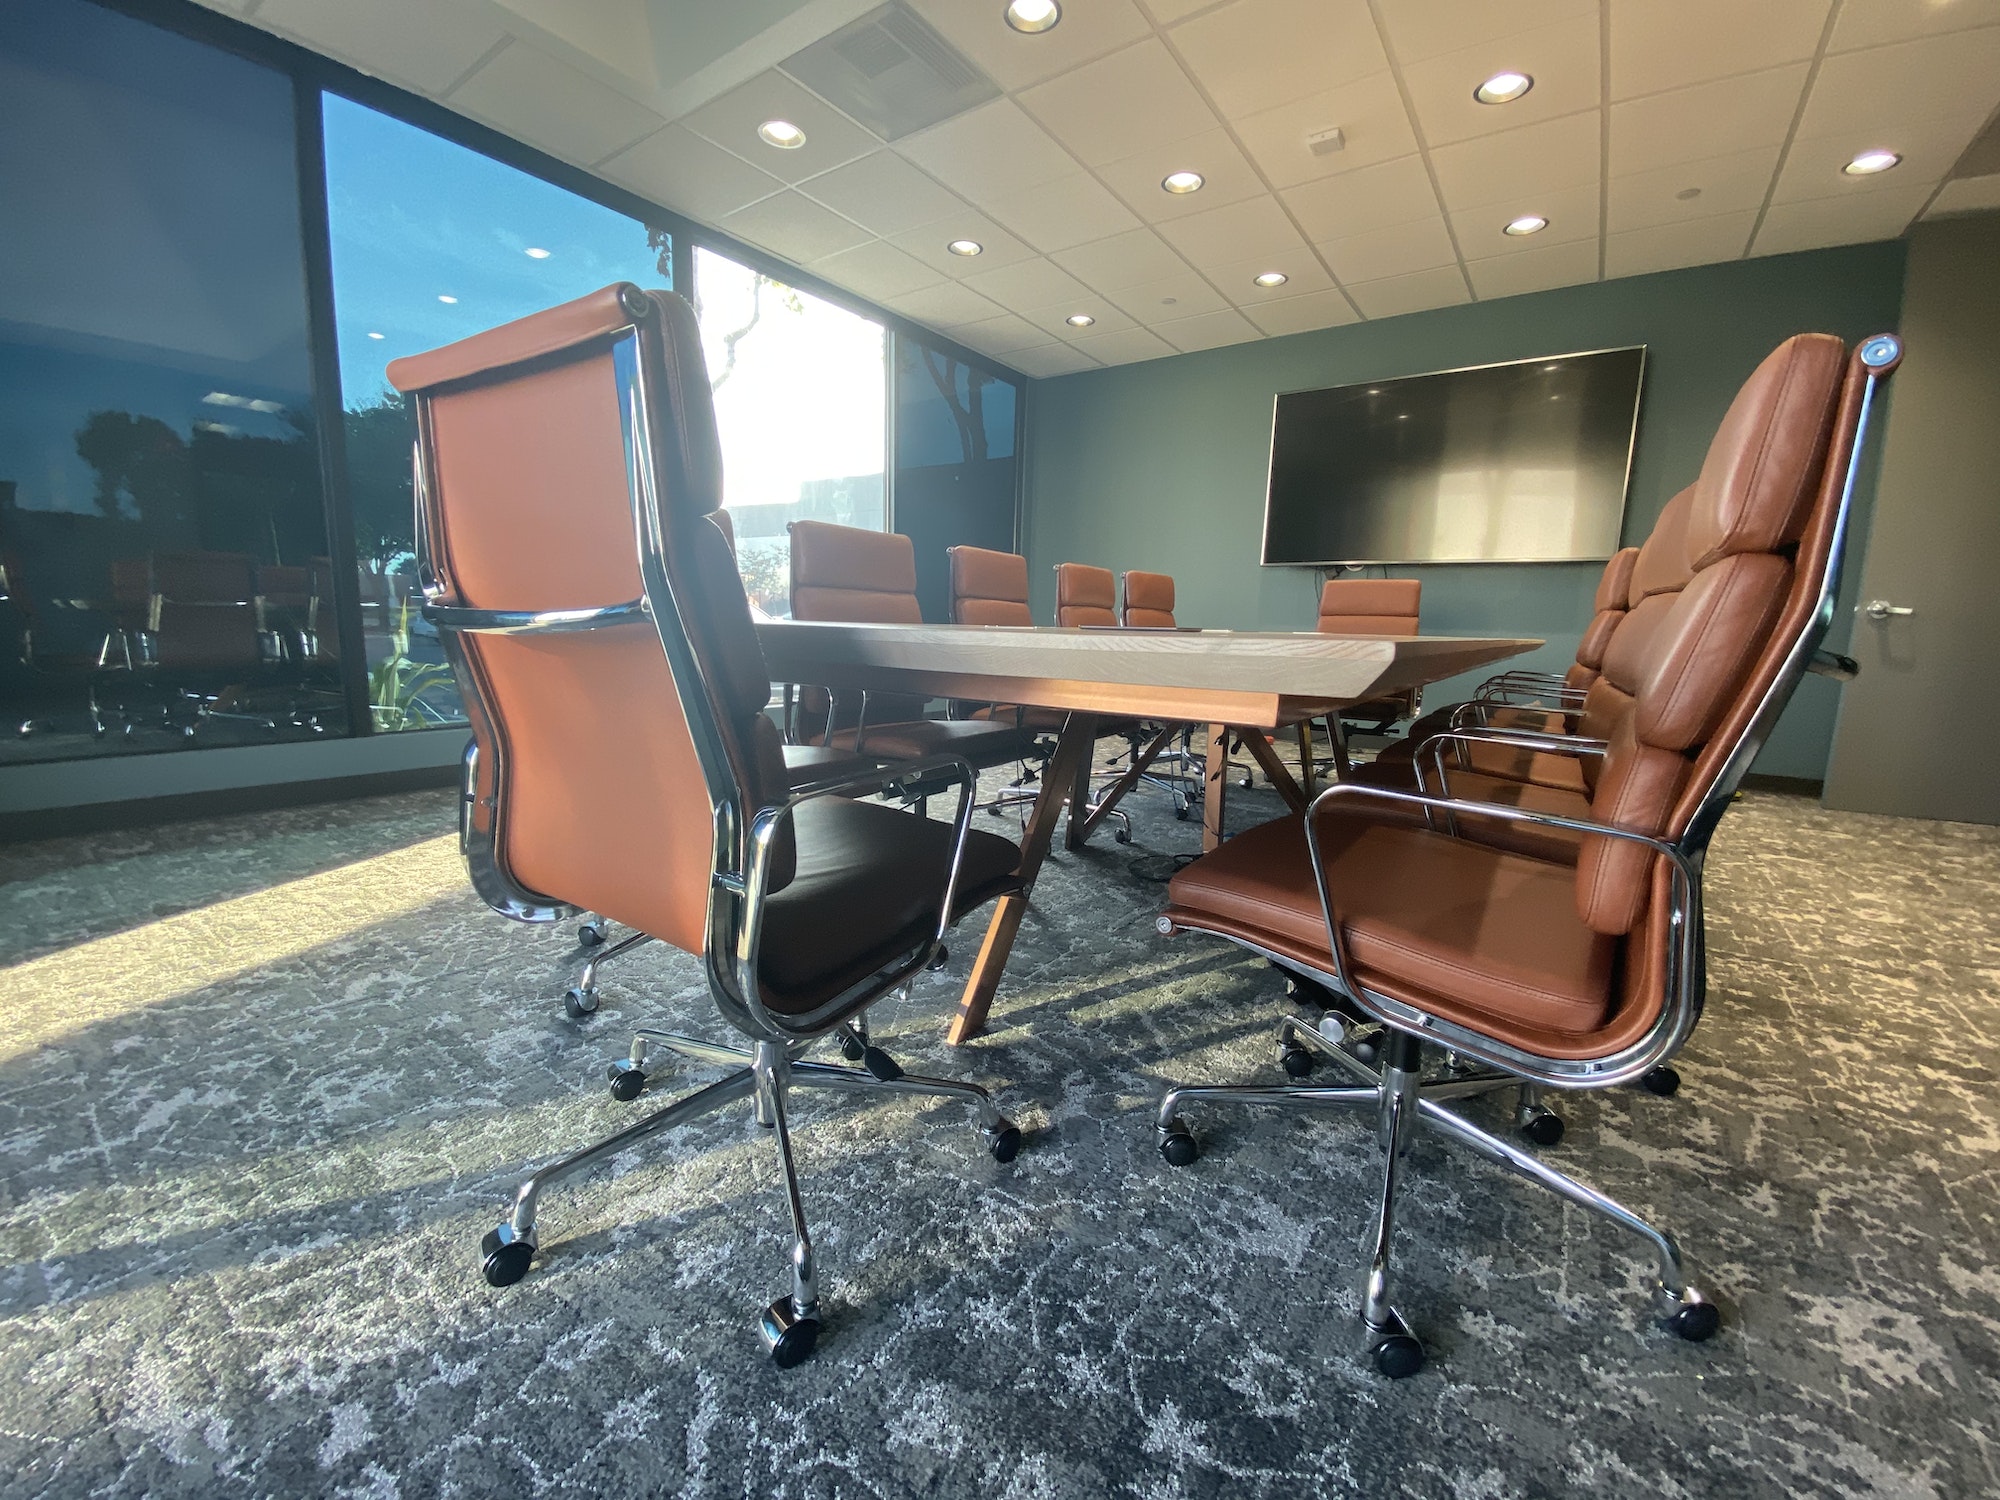 Office decor chairs